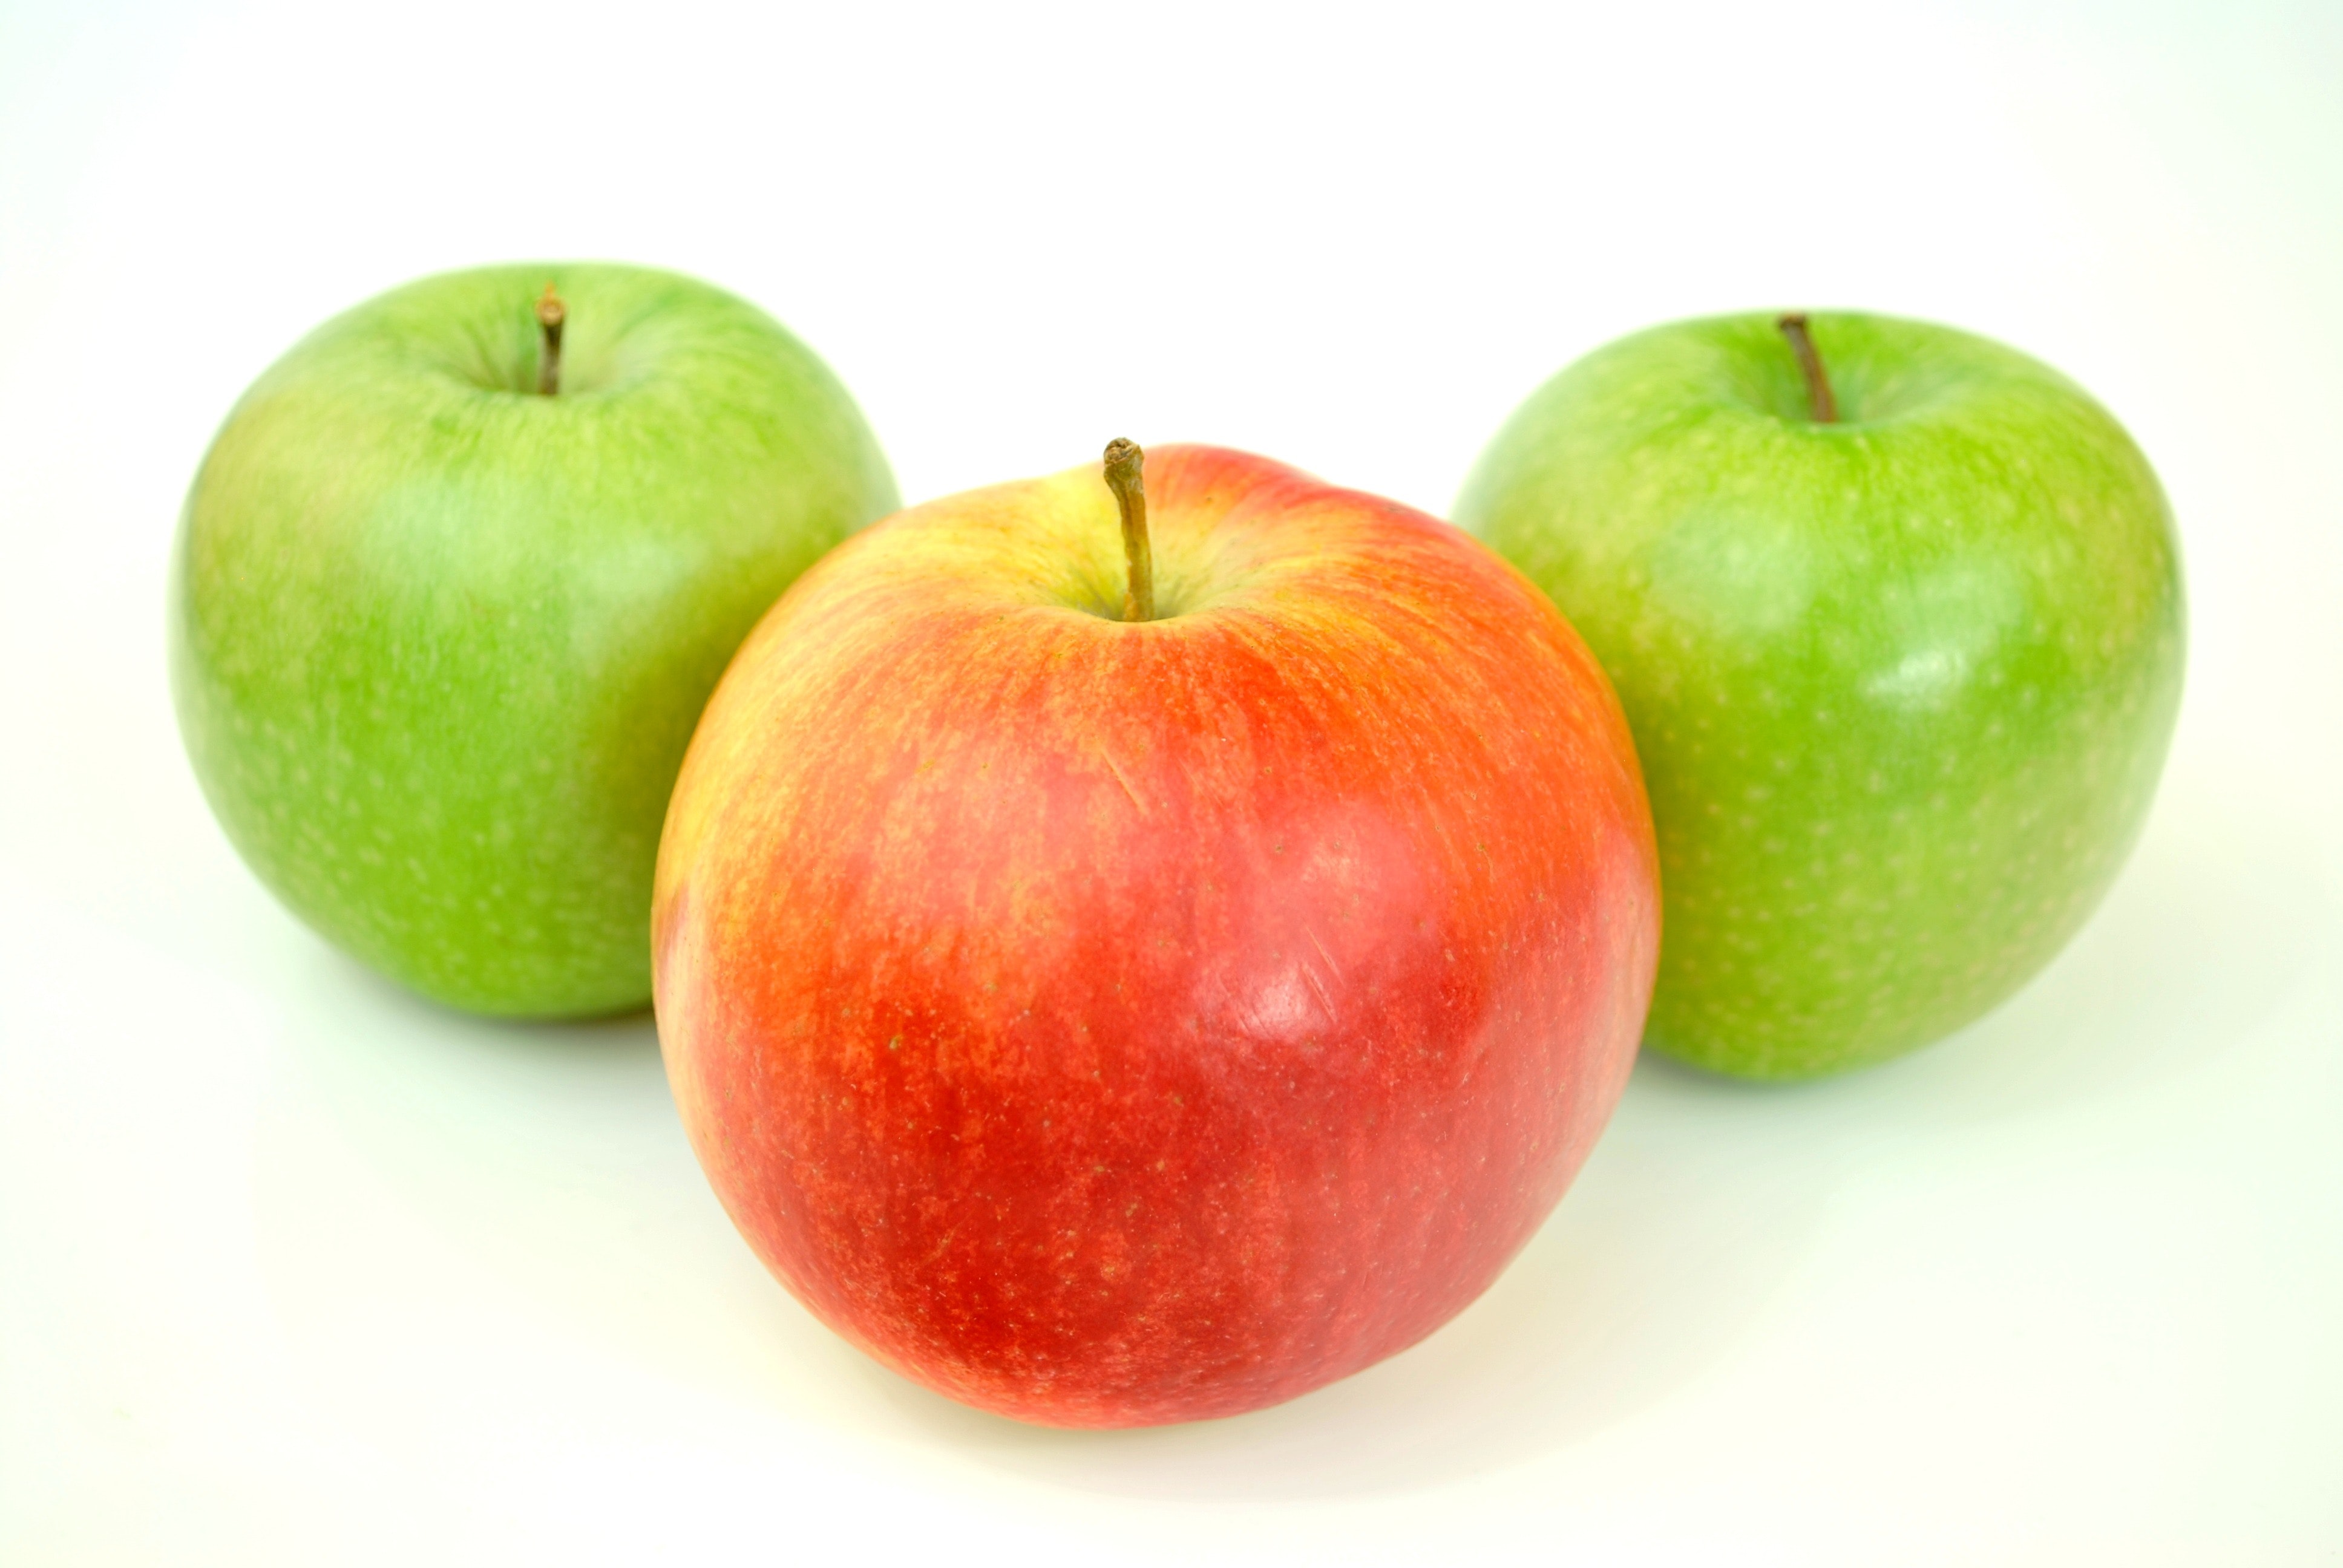 Red apple with two green apples photo